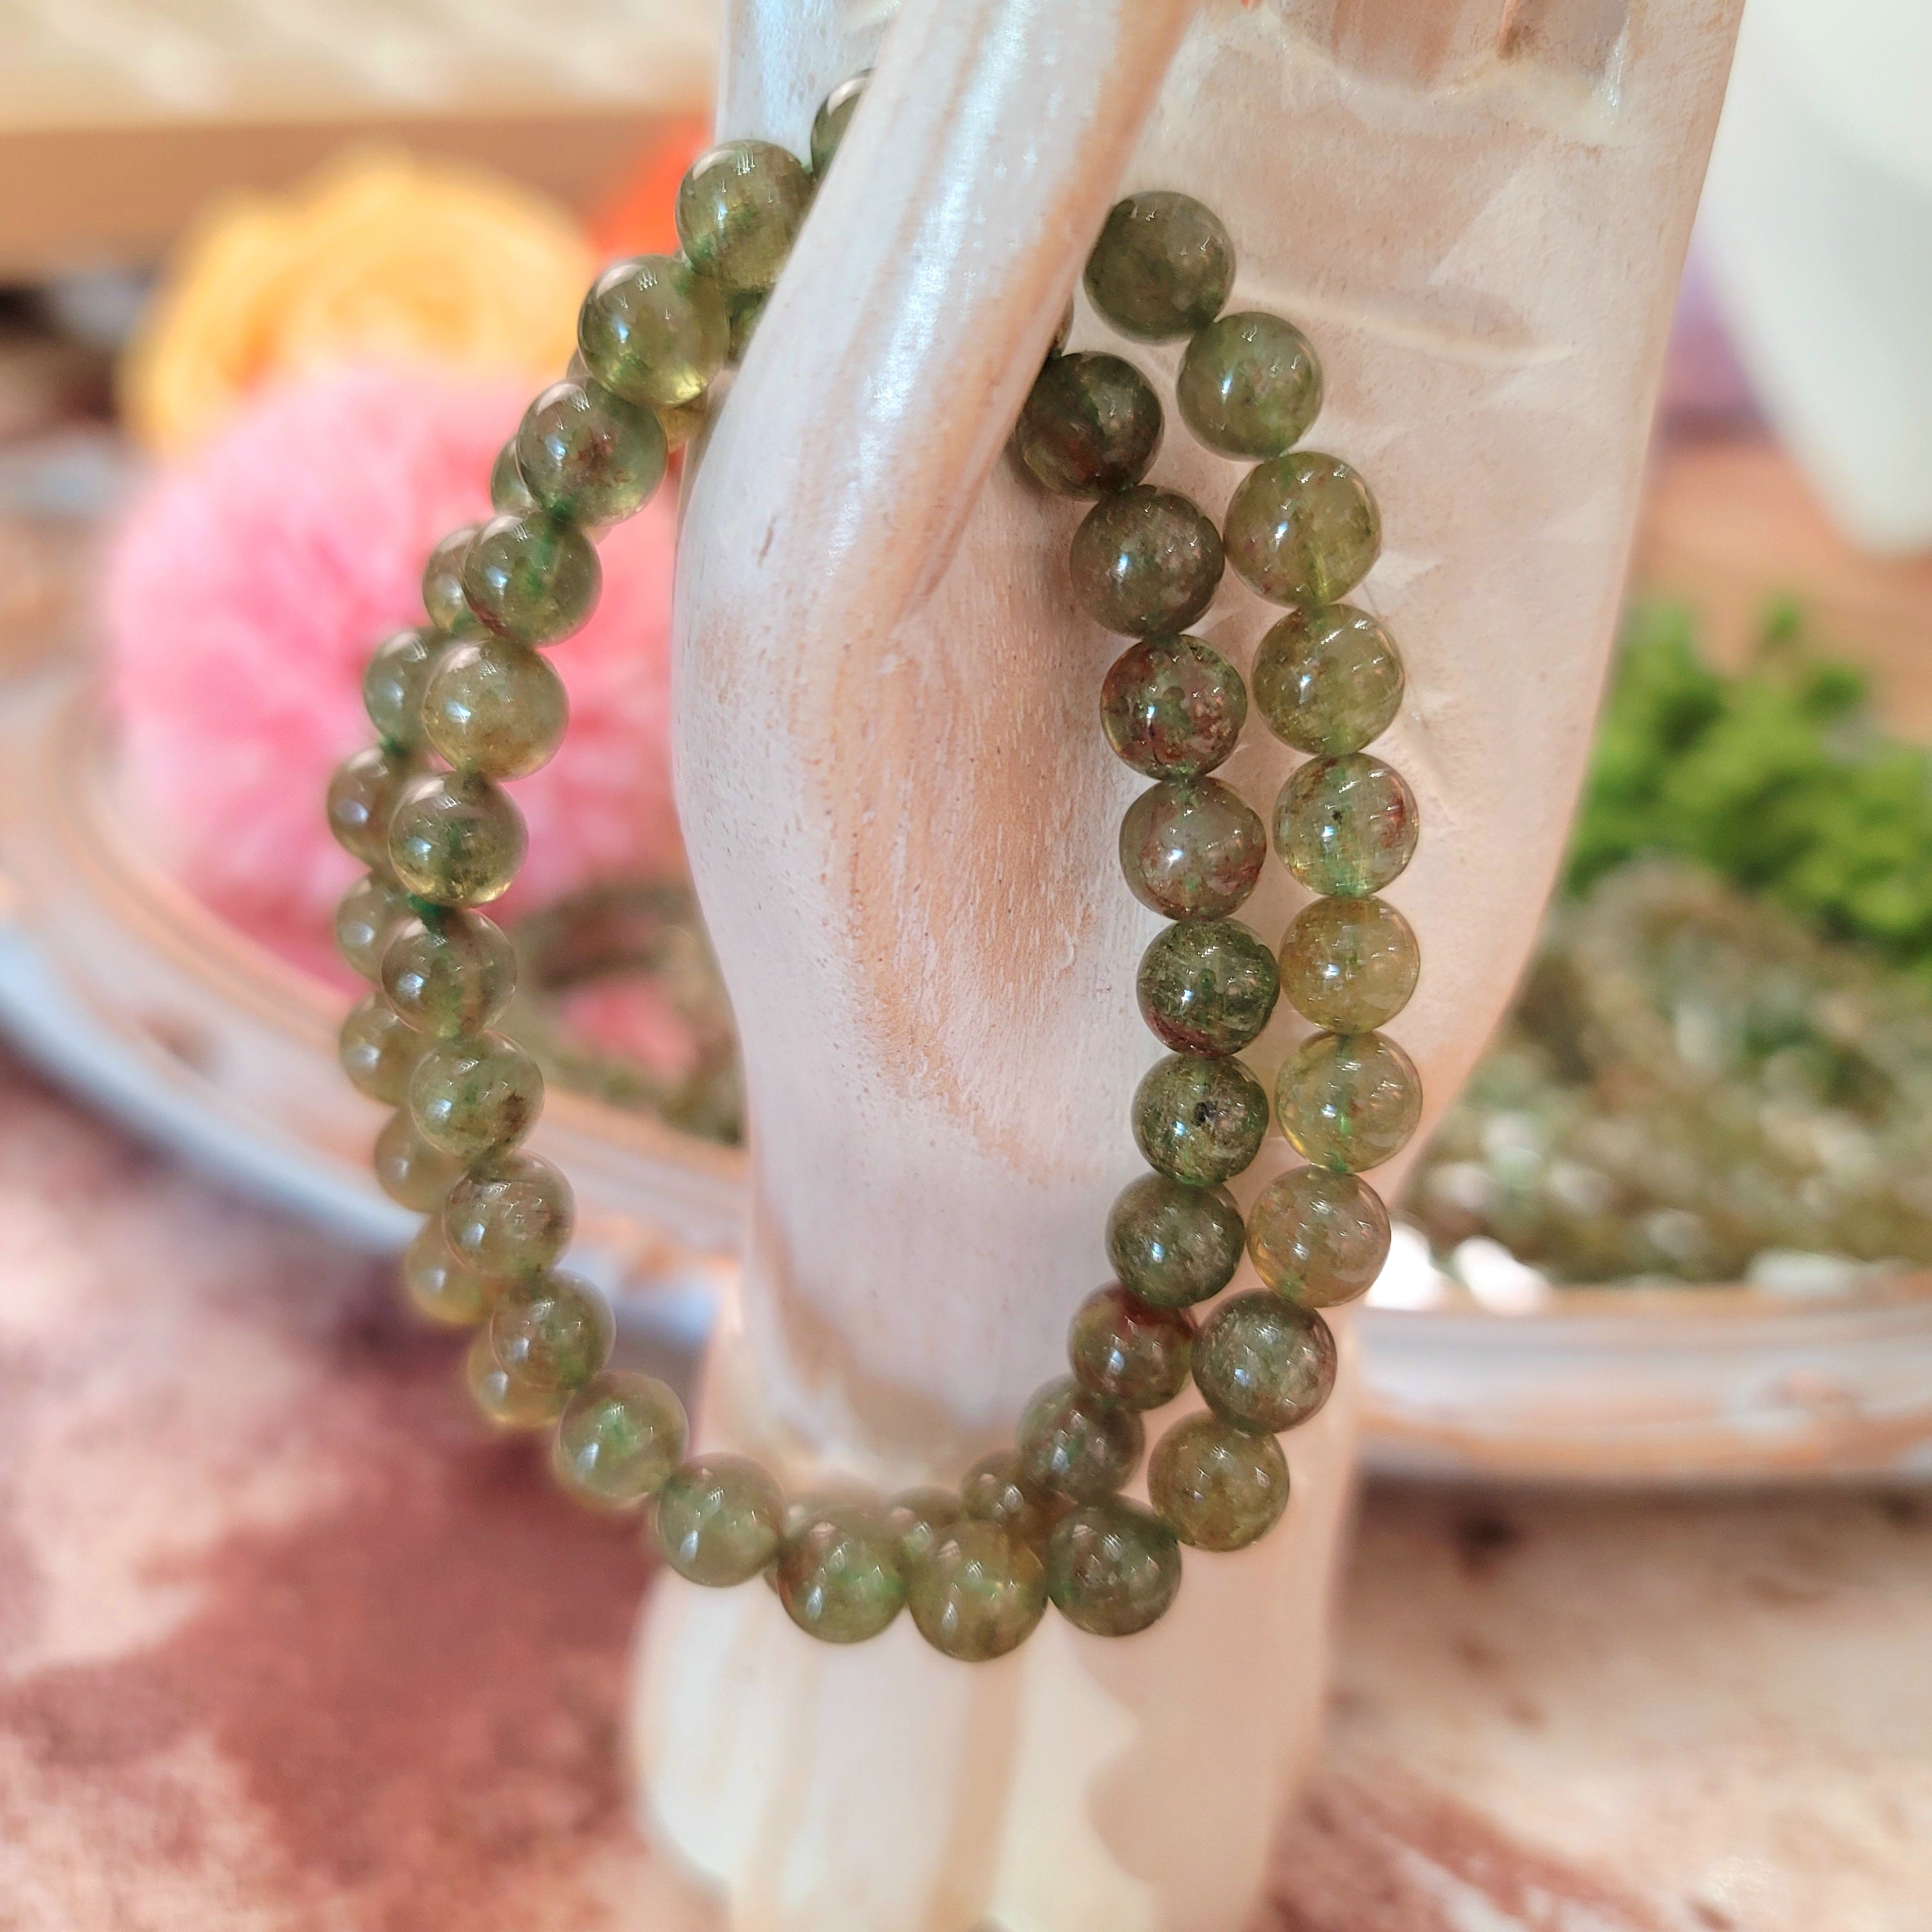 Green Apatite with Sunstone Bracelet (High Quality) for Emotional Balance, Logic and Stress Relief